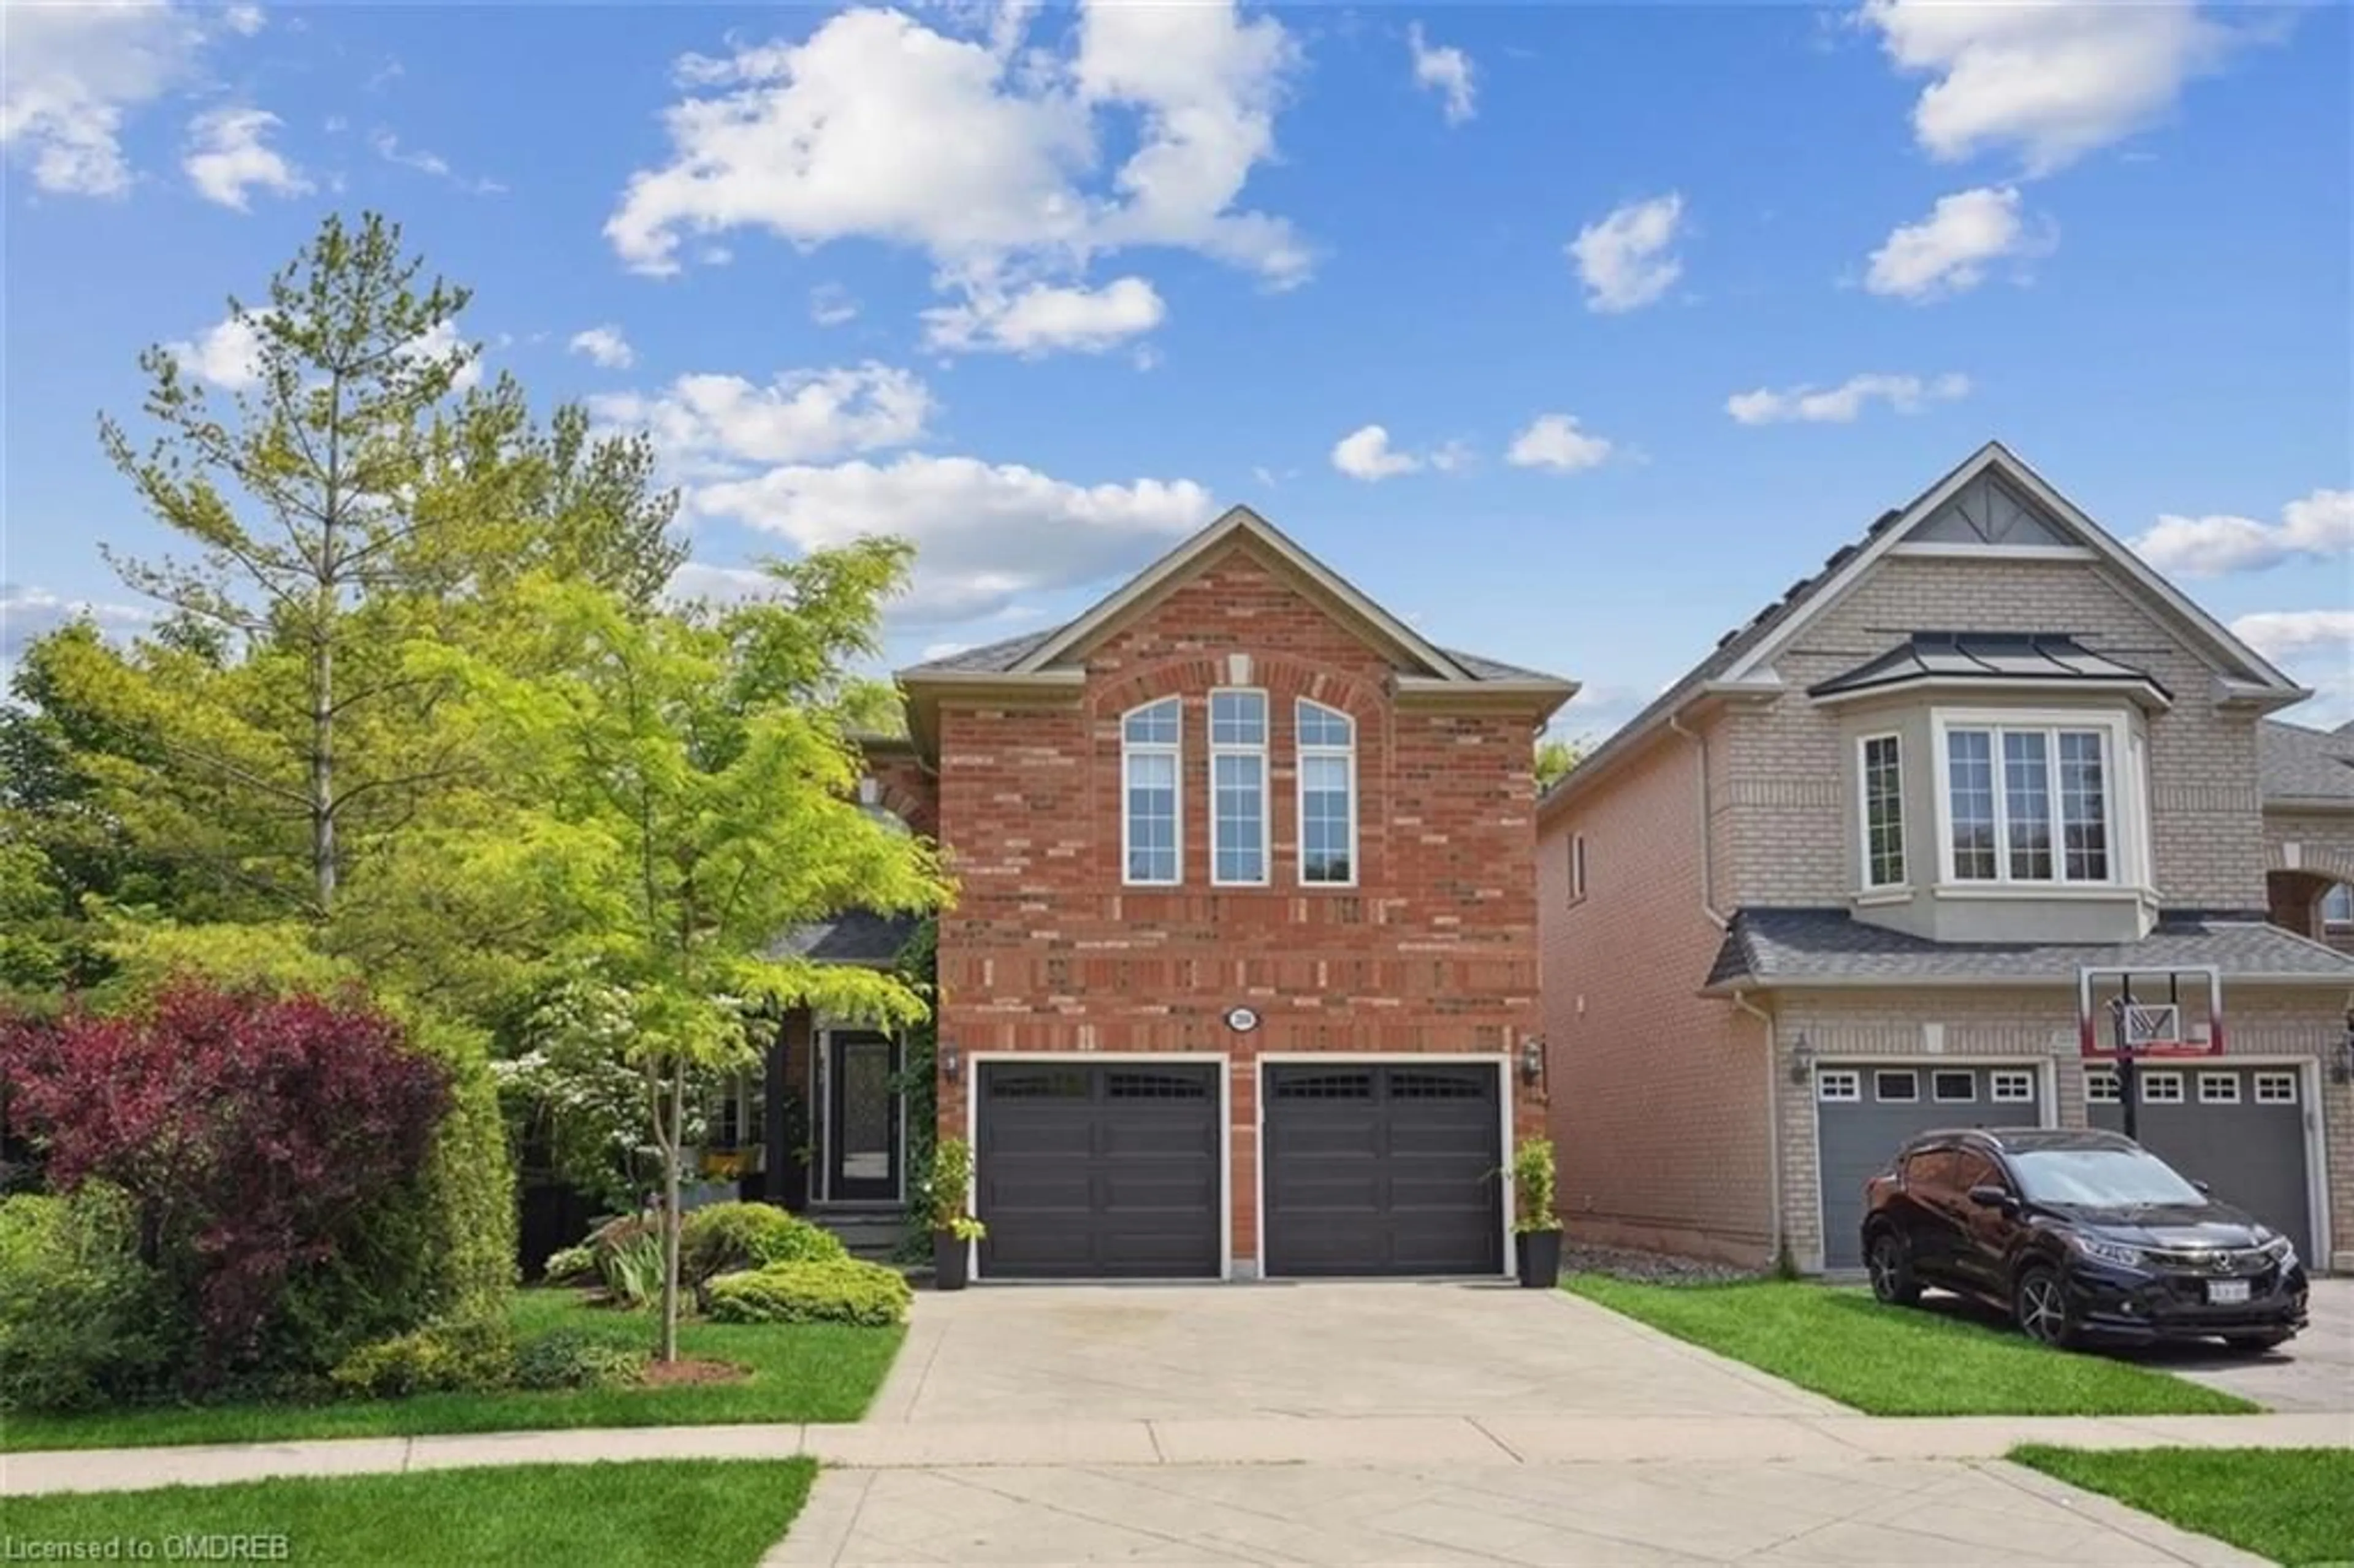 Home with brick exterior material for 2108 Woodgate Dr, Oakville Ontario L6M 4E1